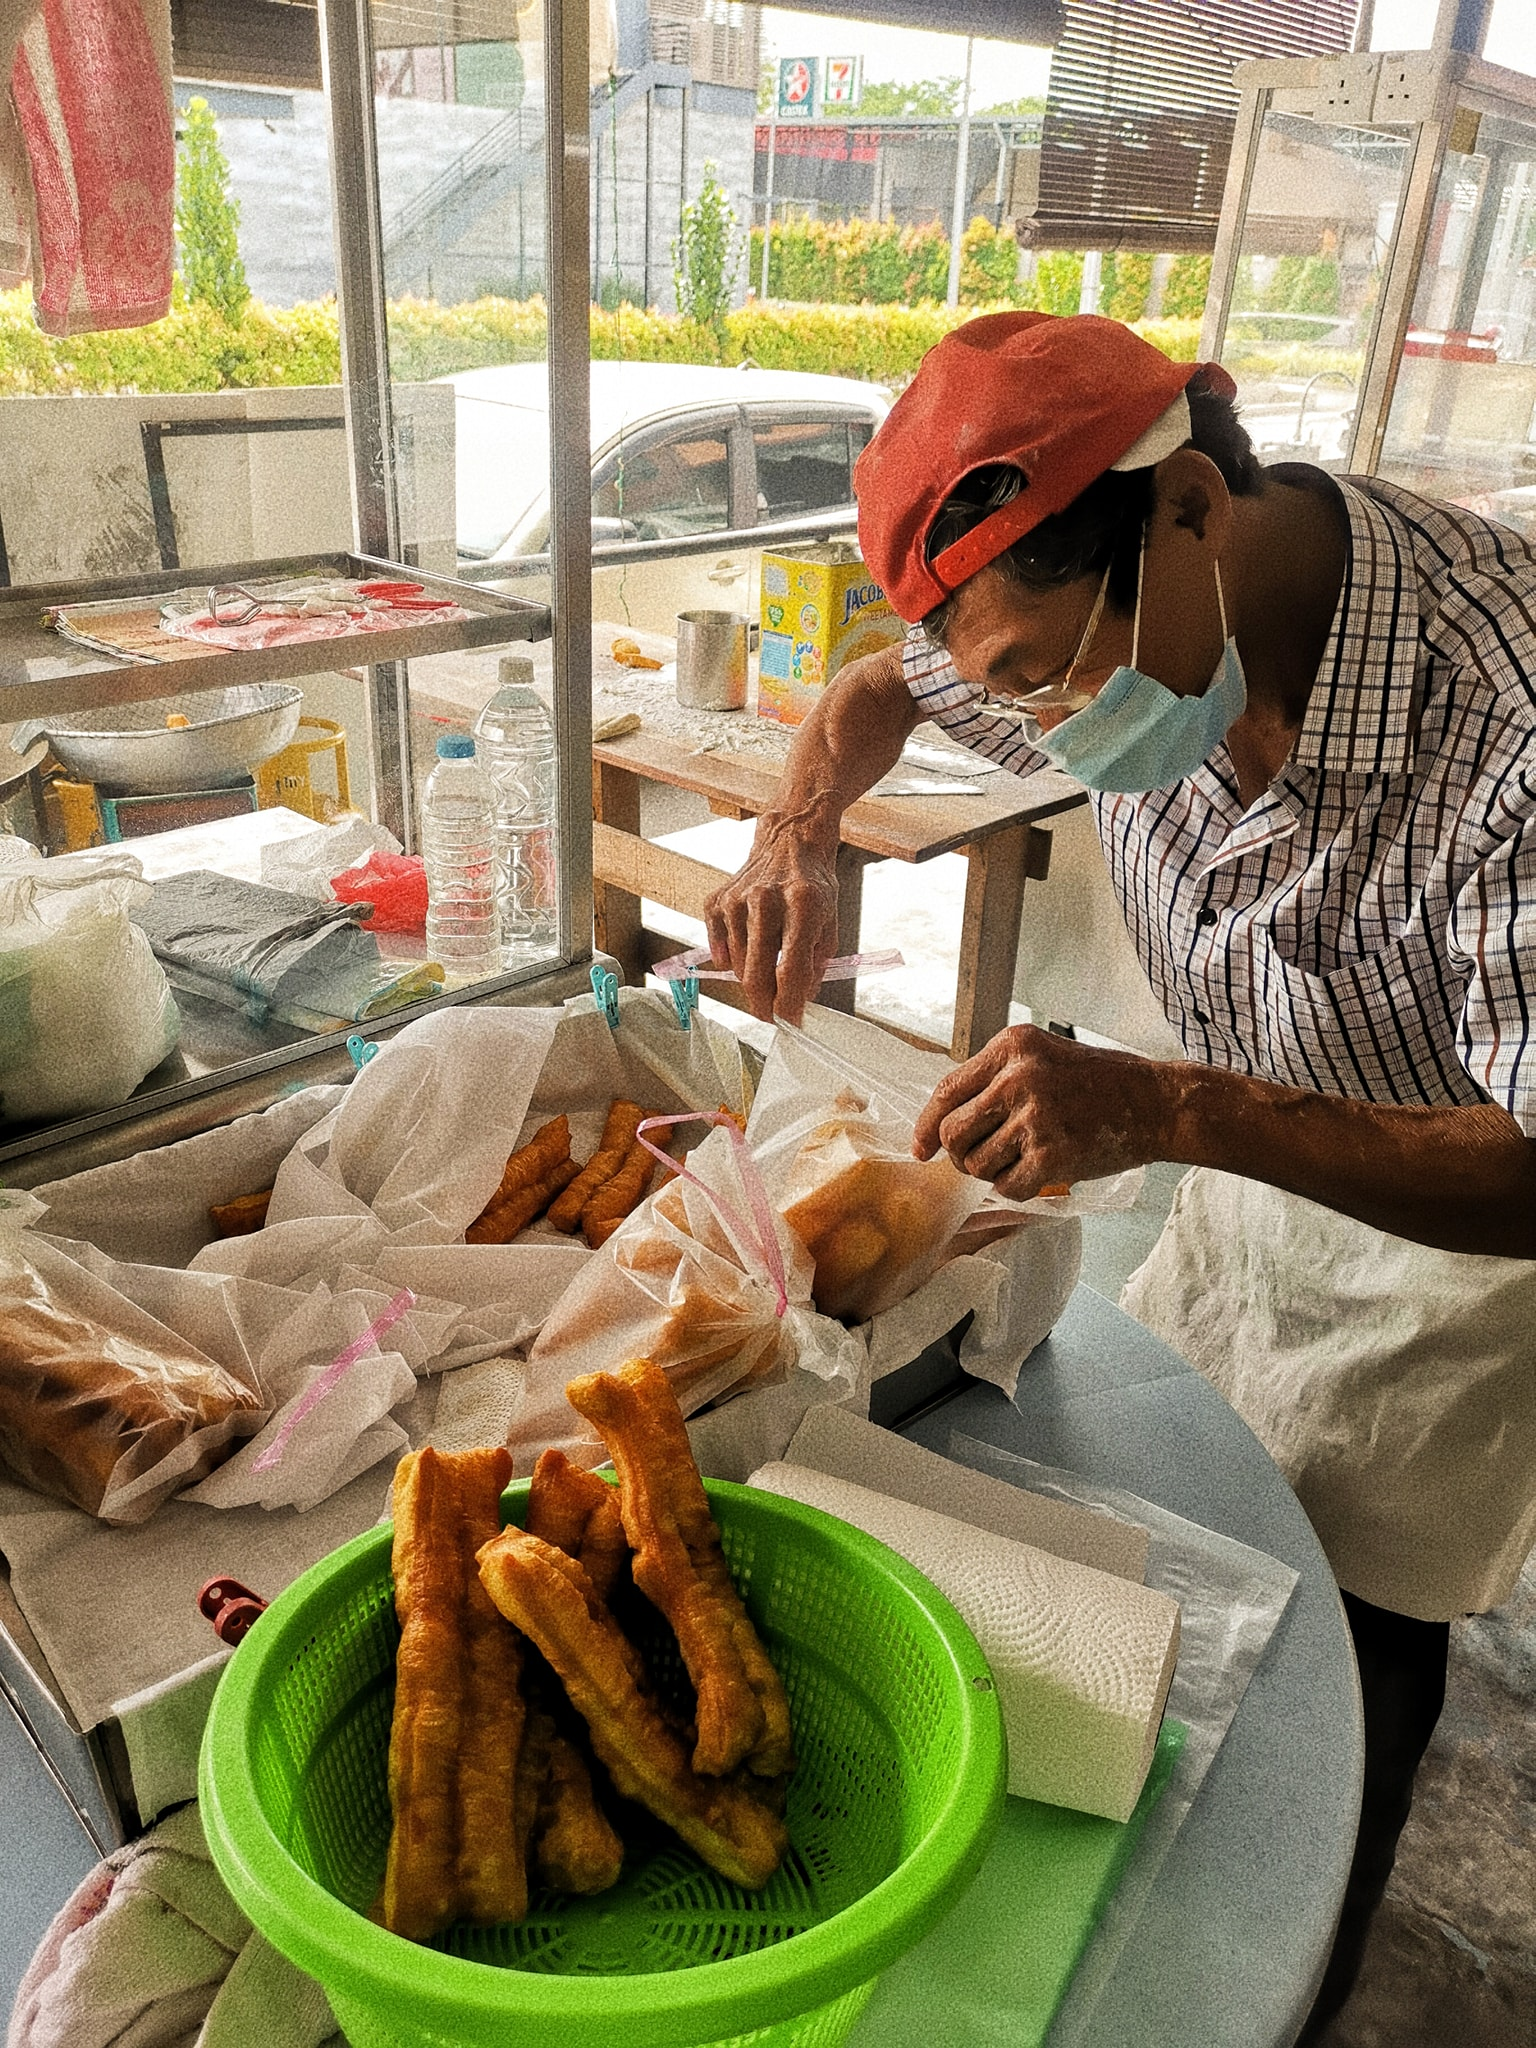 "i only earn rm5 a day" 75yo uncle braves fmco storm by selling "youtiao" at rm1 each